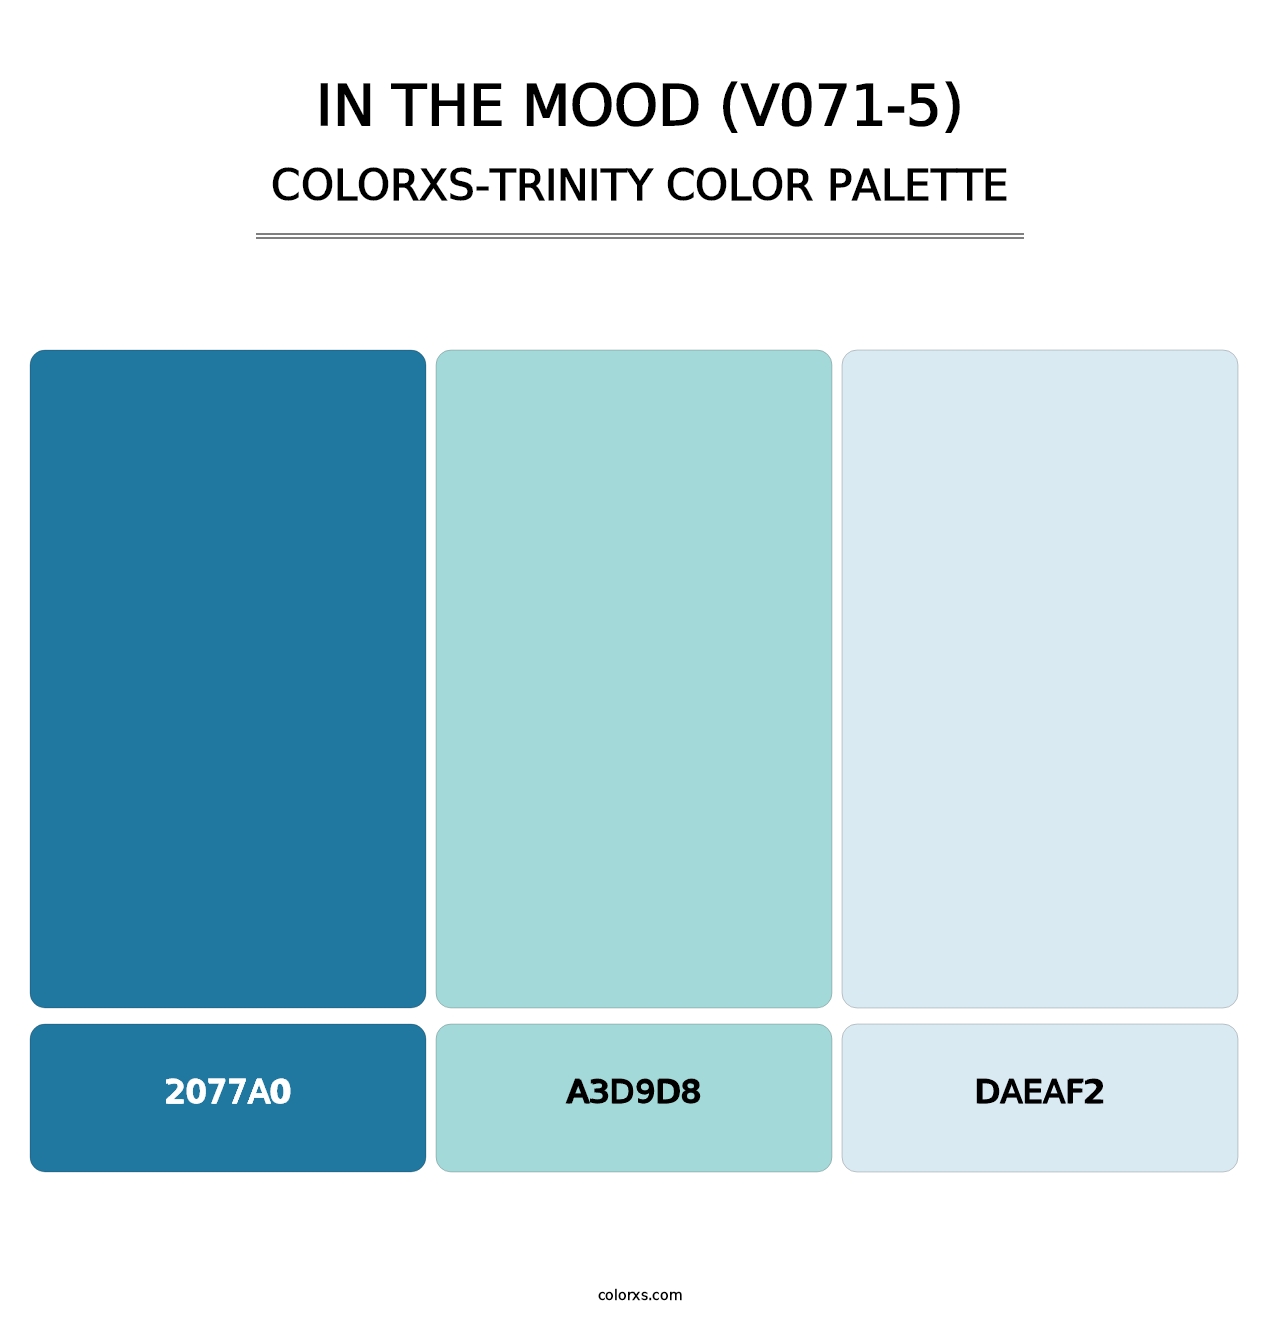 In the Mood (V071-5) - Colorxs Trinity Palette